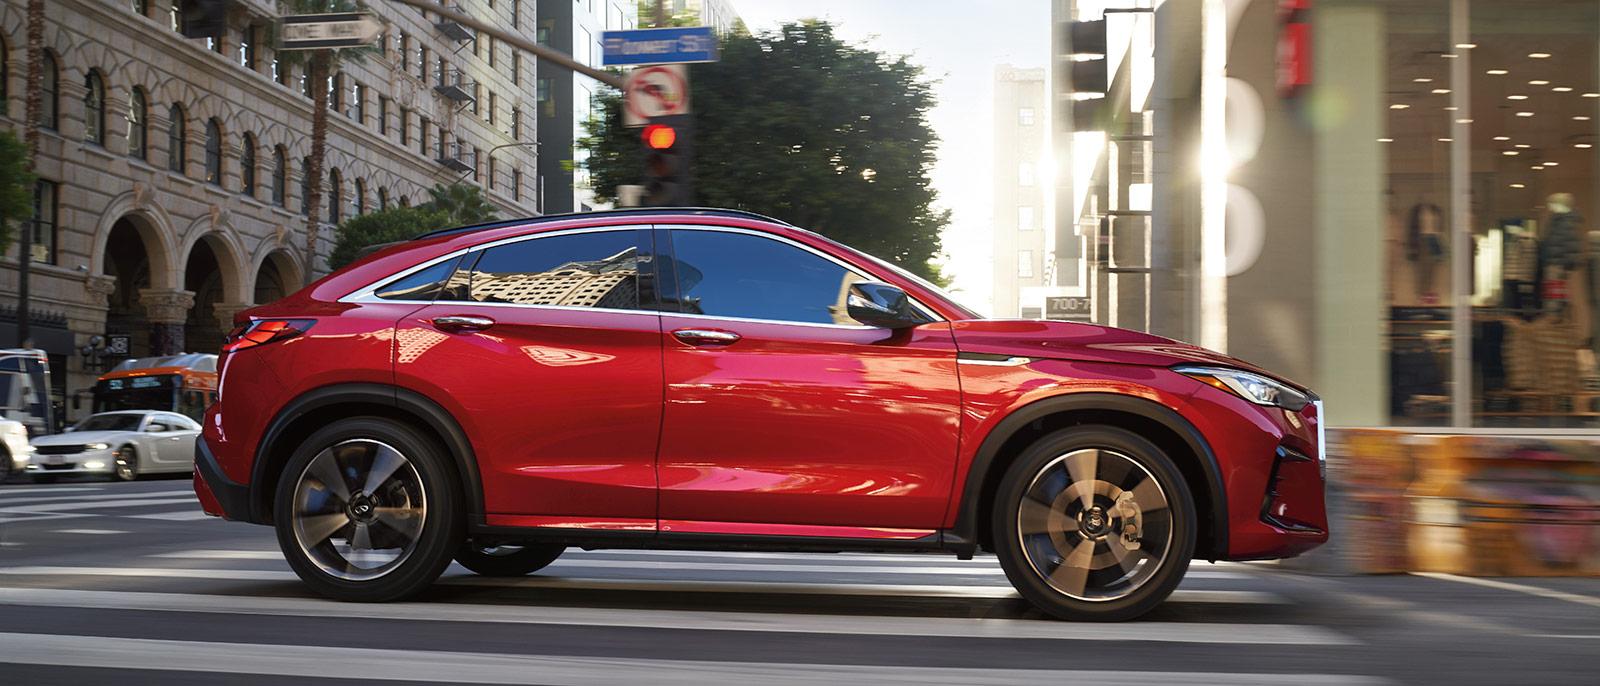 Profile view of a red INFINITI QX55 driving through a city.